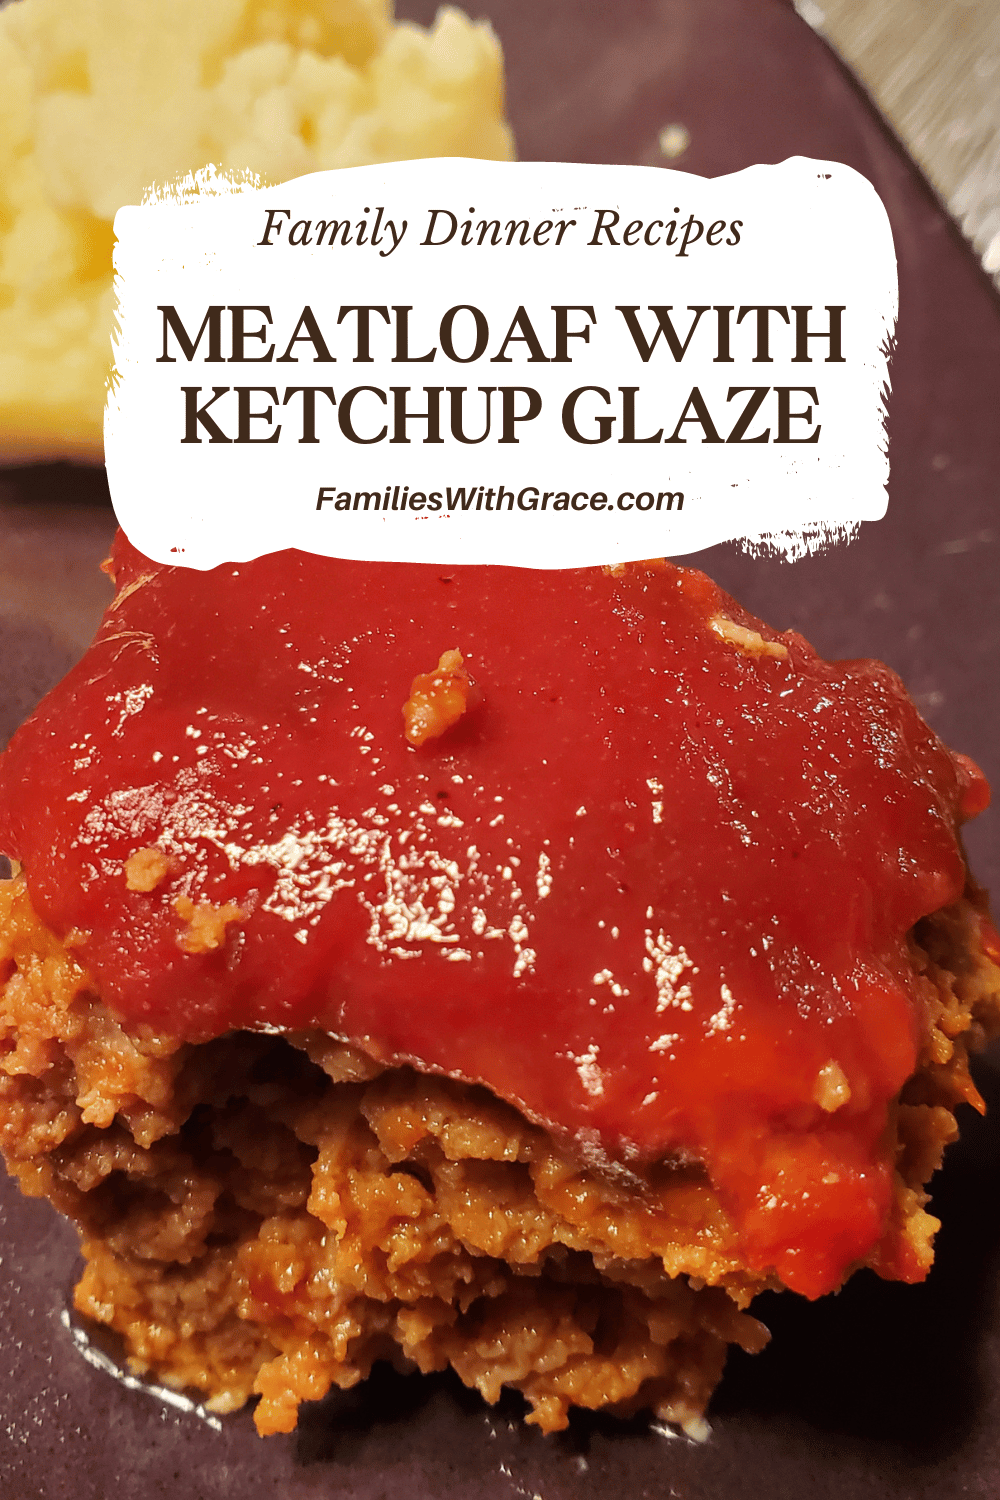 Meatloaf recipe with ketchup glaze